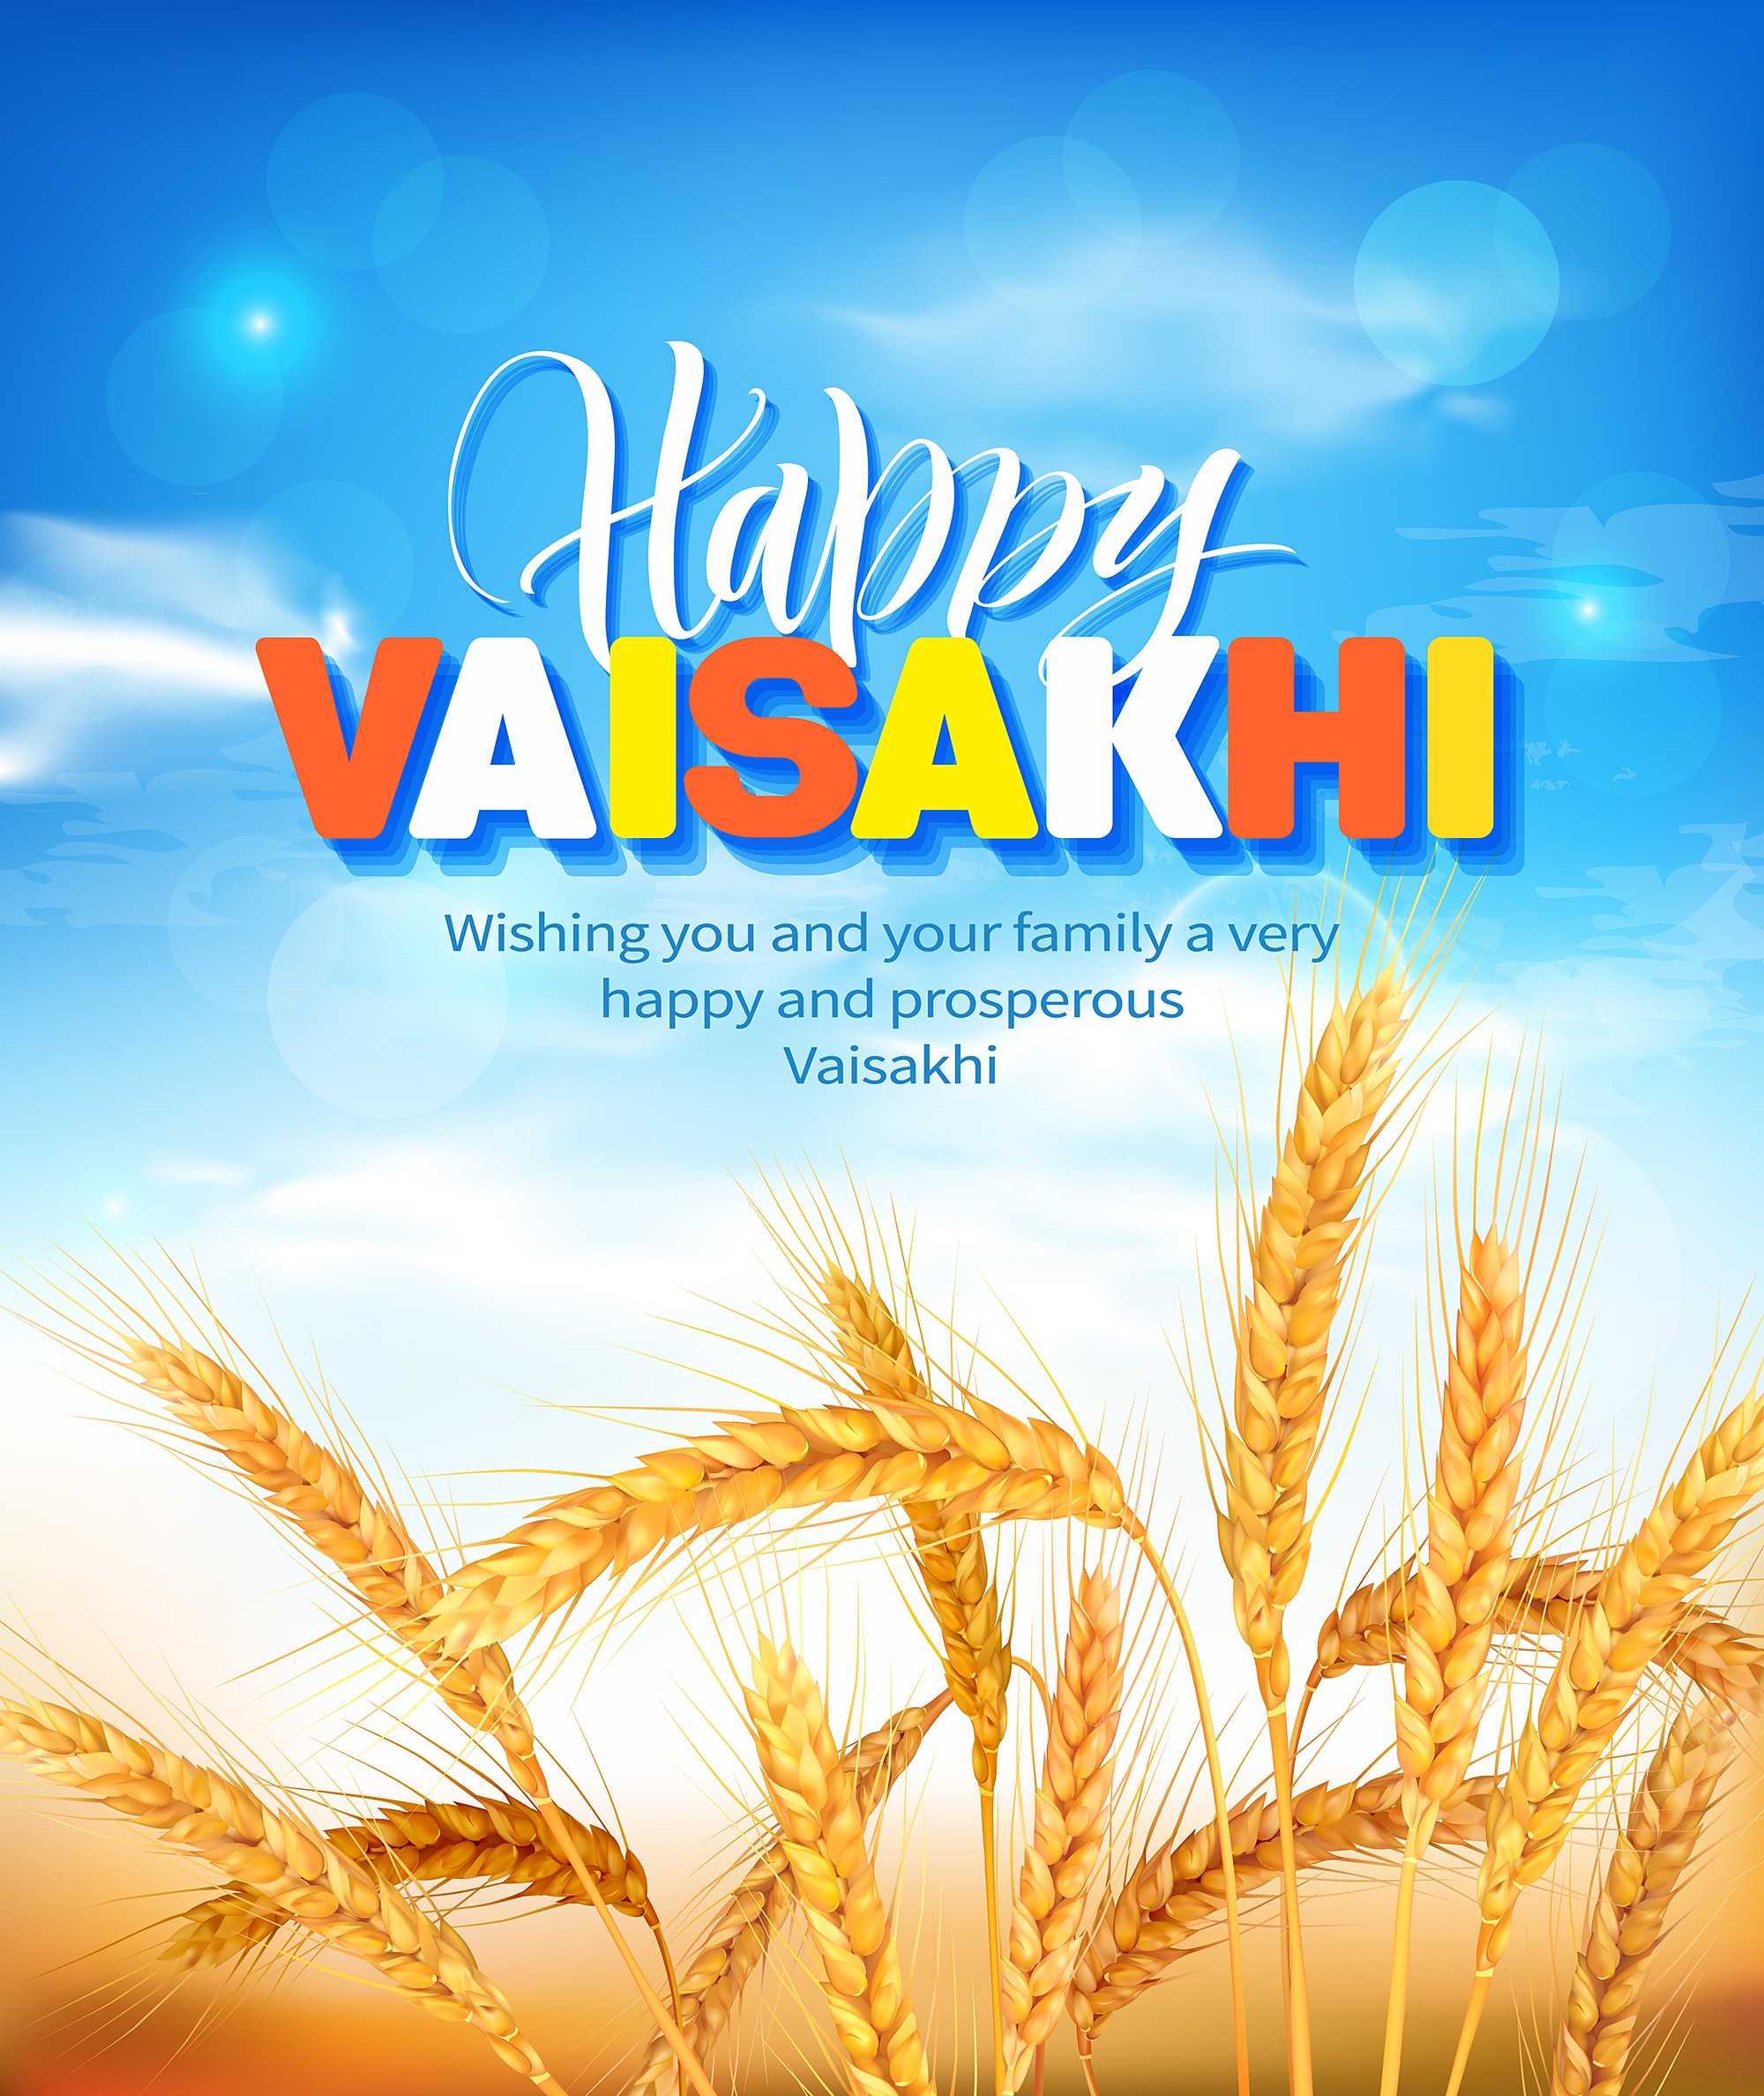 Happy Baisakhi 2022: Wishes Images, Wallpaper, Quotes, Status, Photos, Pics, SMS, Messages.  (Image: Shutterstock)